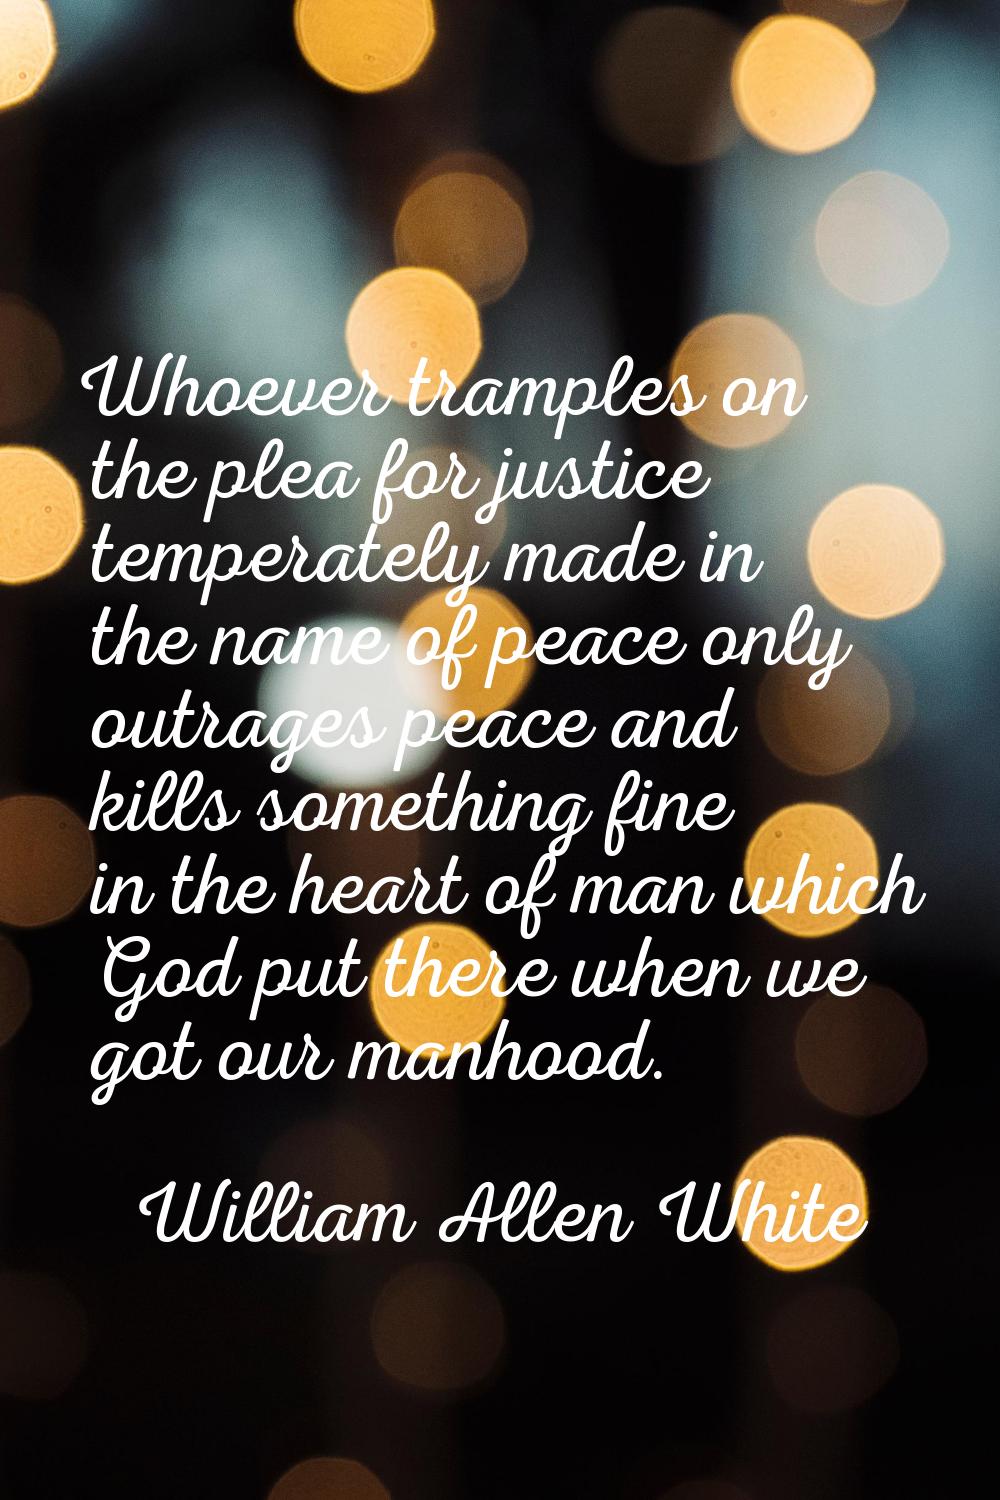 Whoever tramples on the plea for justice temperately made in the name of peace only outrages peace 